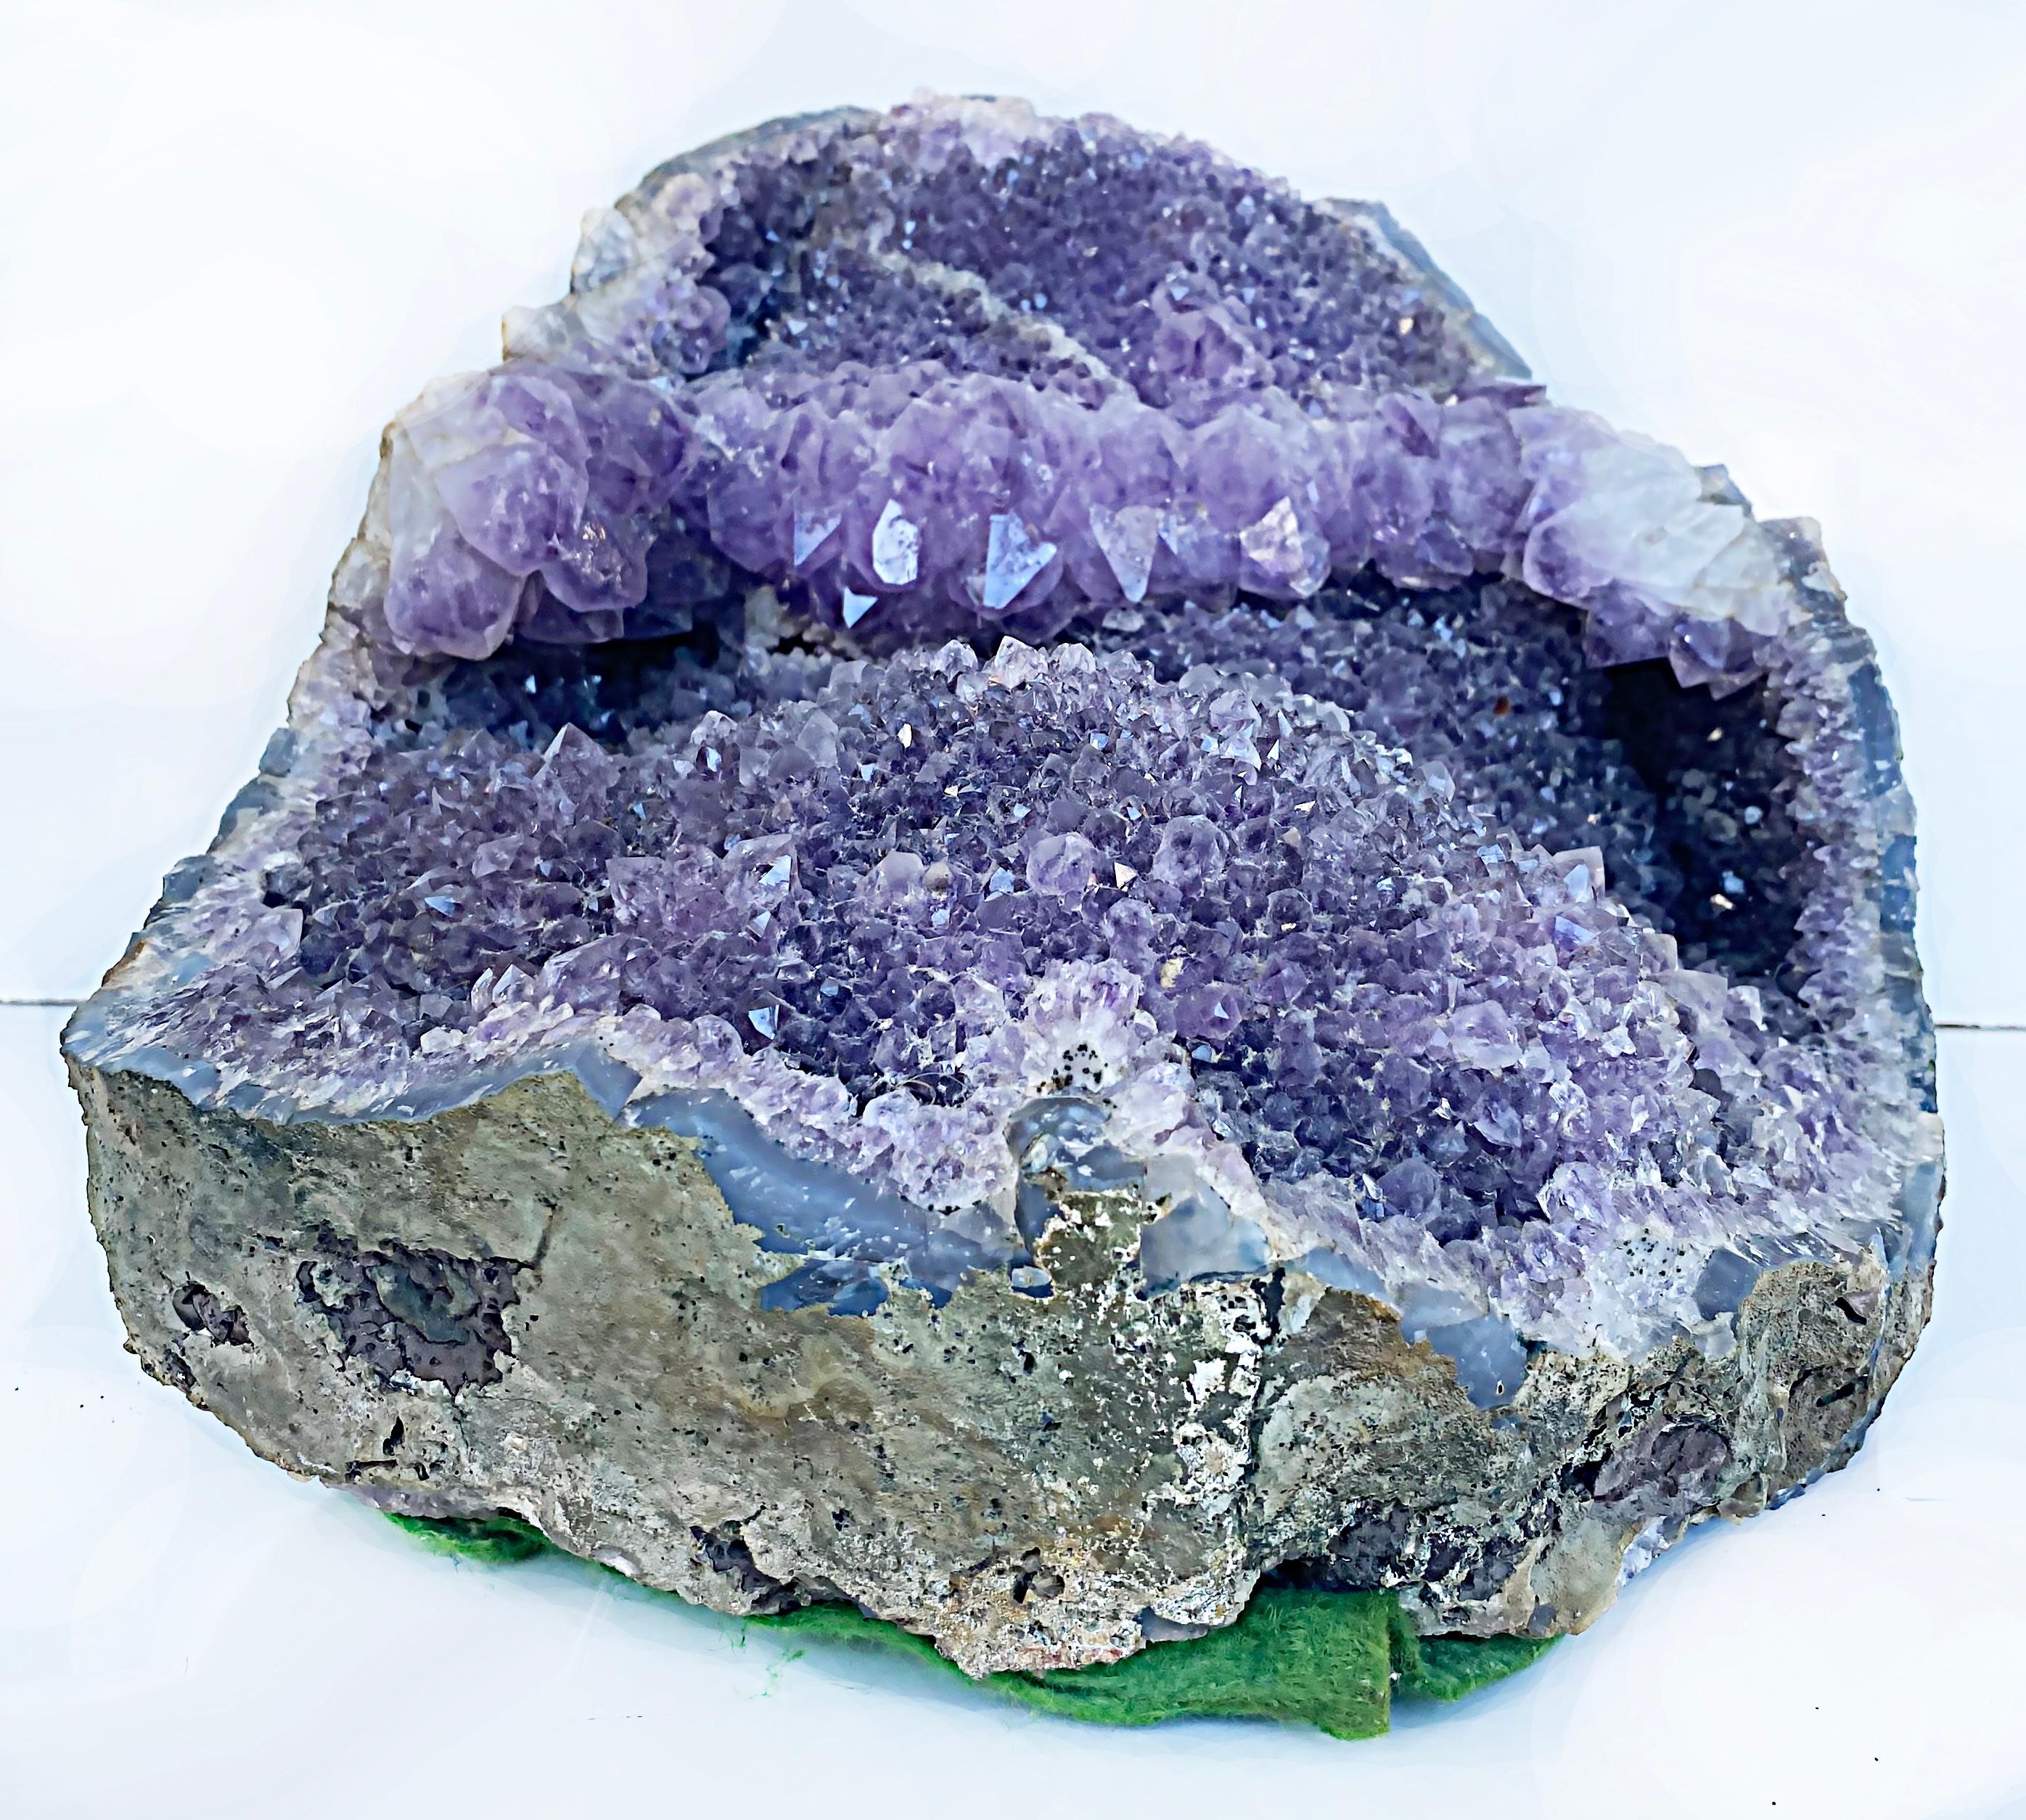 Large Amethyst Quartz crystal geode mineral specimen cluster.

Offered for sale is a naturally formed large amethyst crystal geode that has been nicely opened with an almost 3/4 full formed.

Dimensions: Height: 9.5 in (24.13 cm)
Width: 14 in (35.56